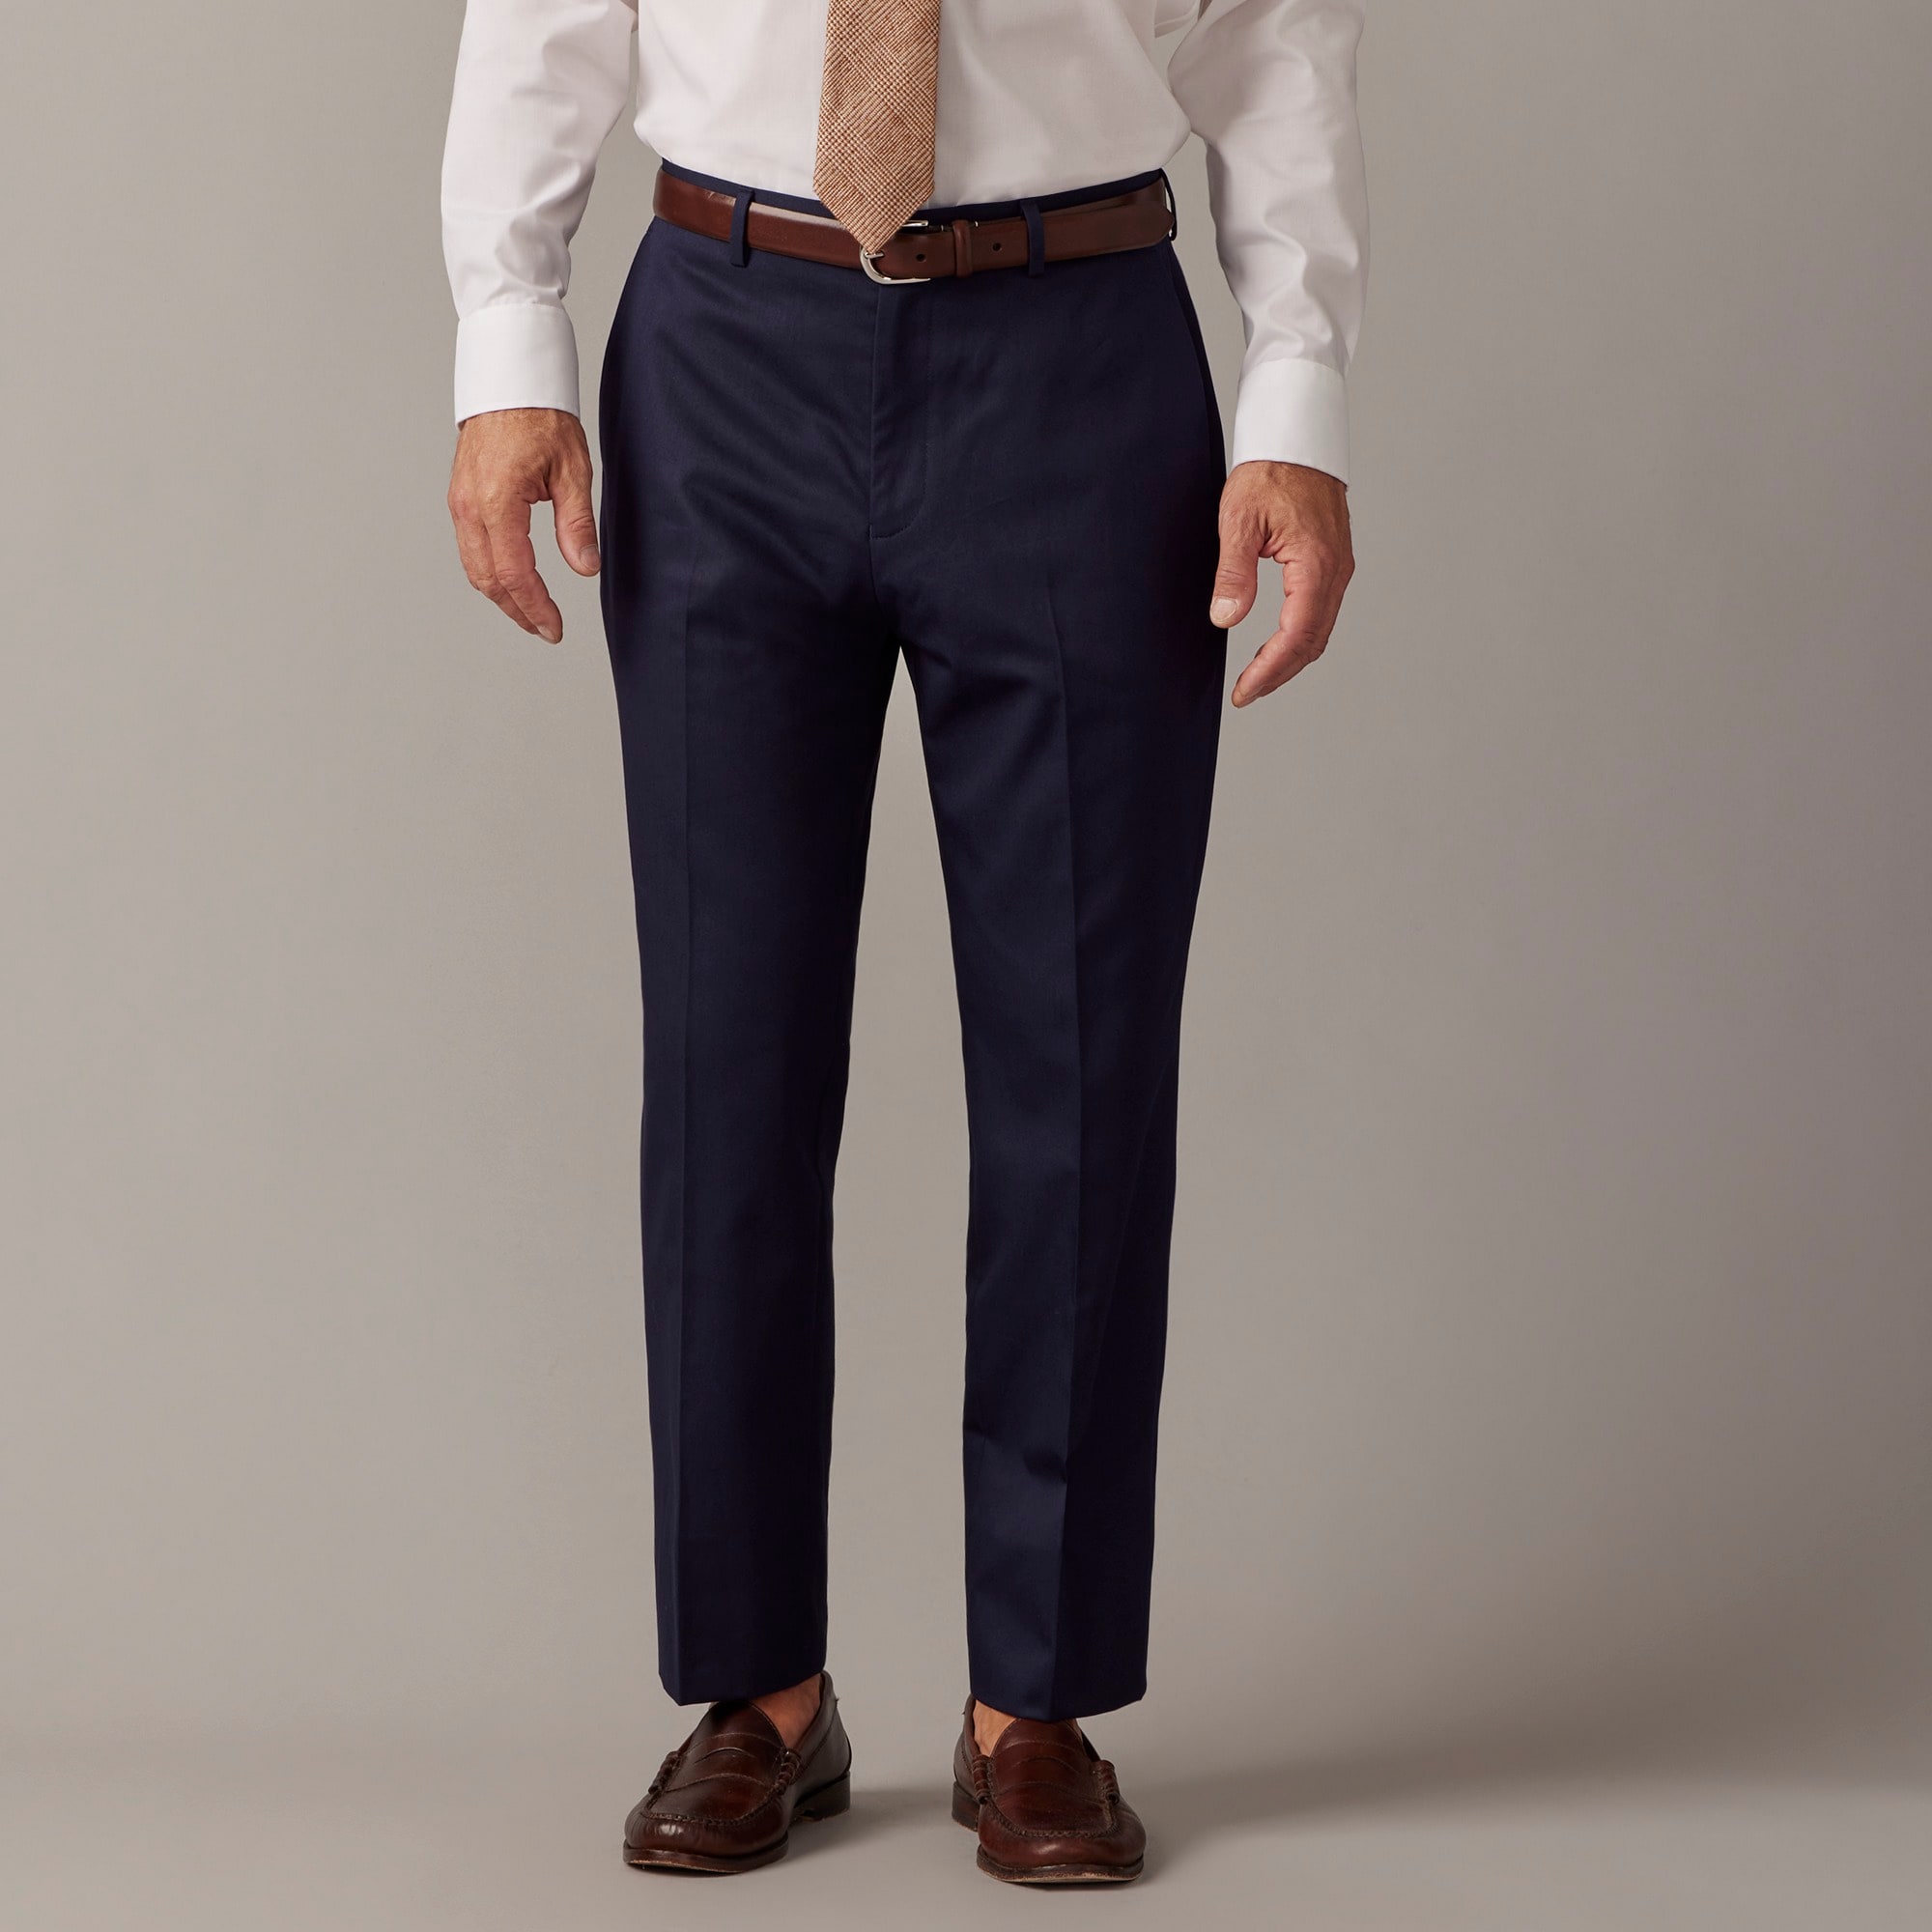 mens Crosby Classic-fit suit pant in Italian chino